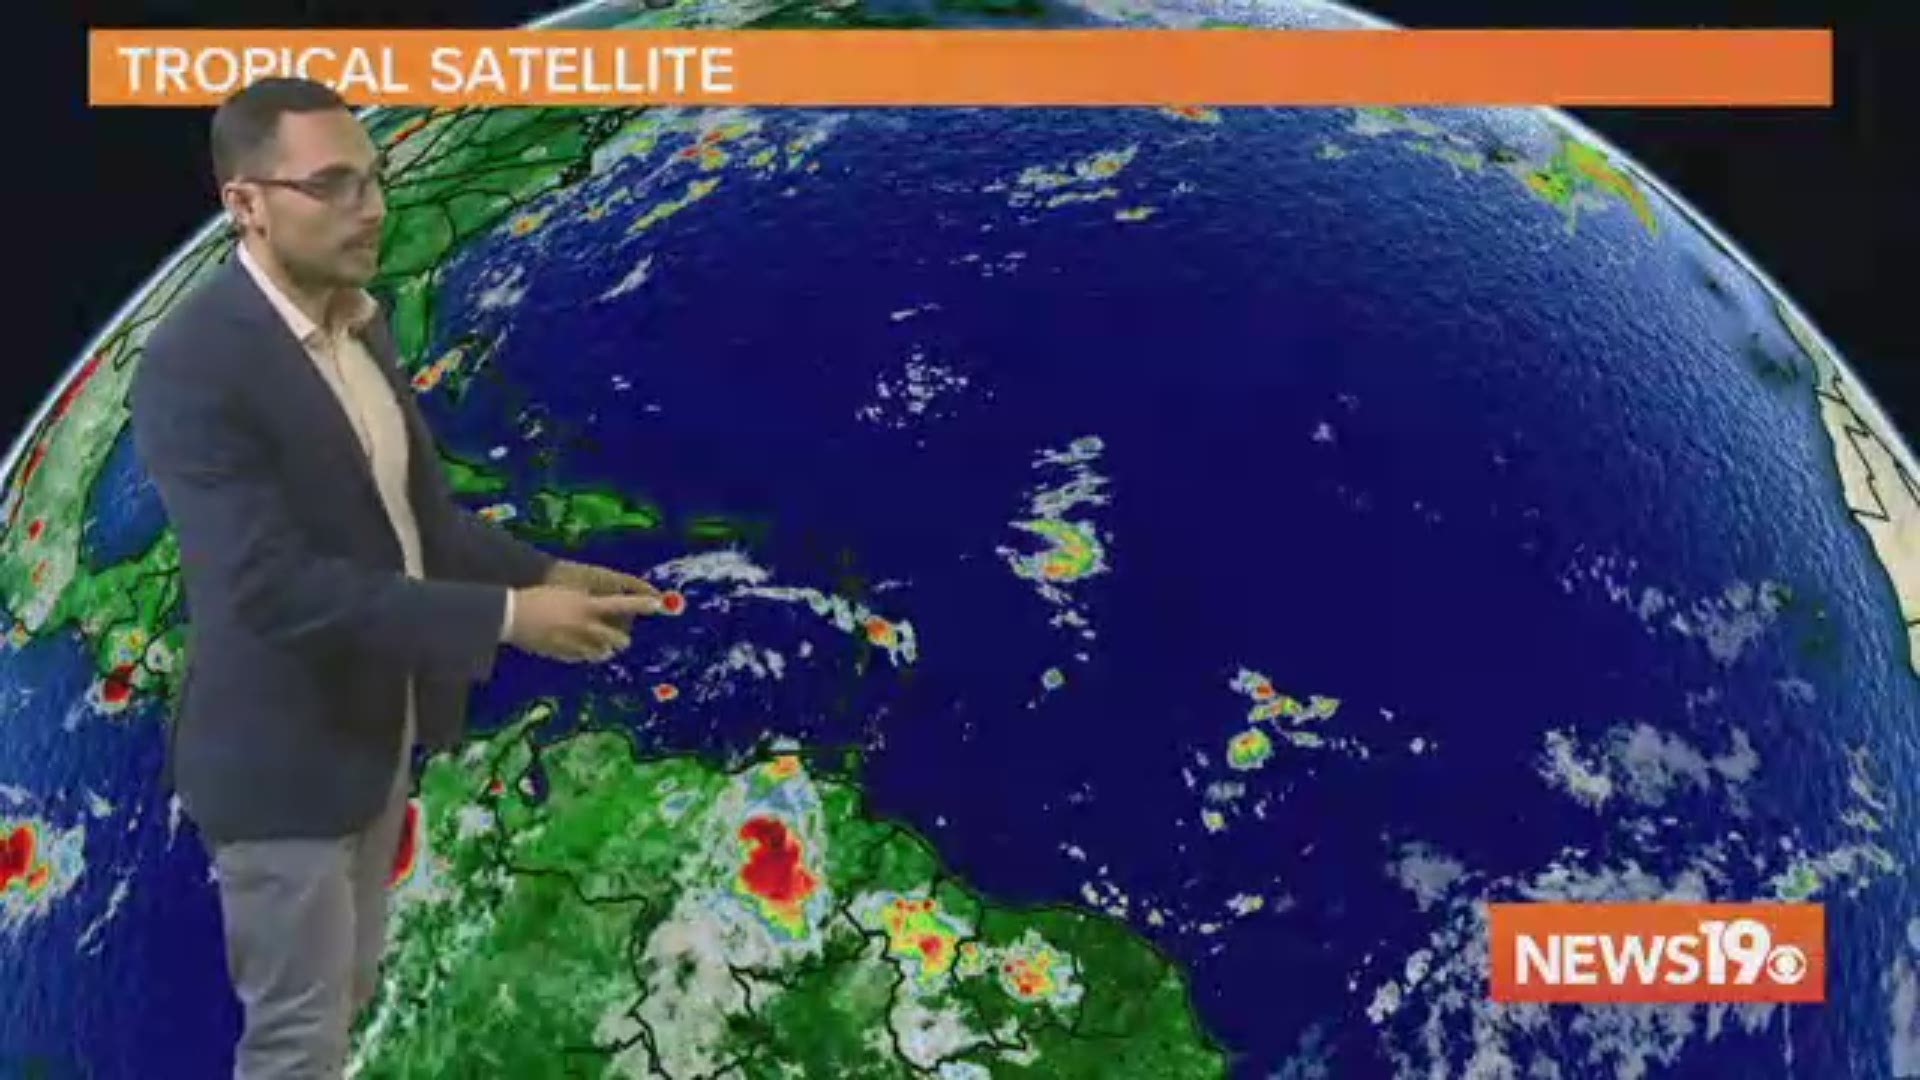 Here's what you need to know this week in the tropics.